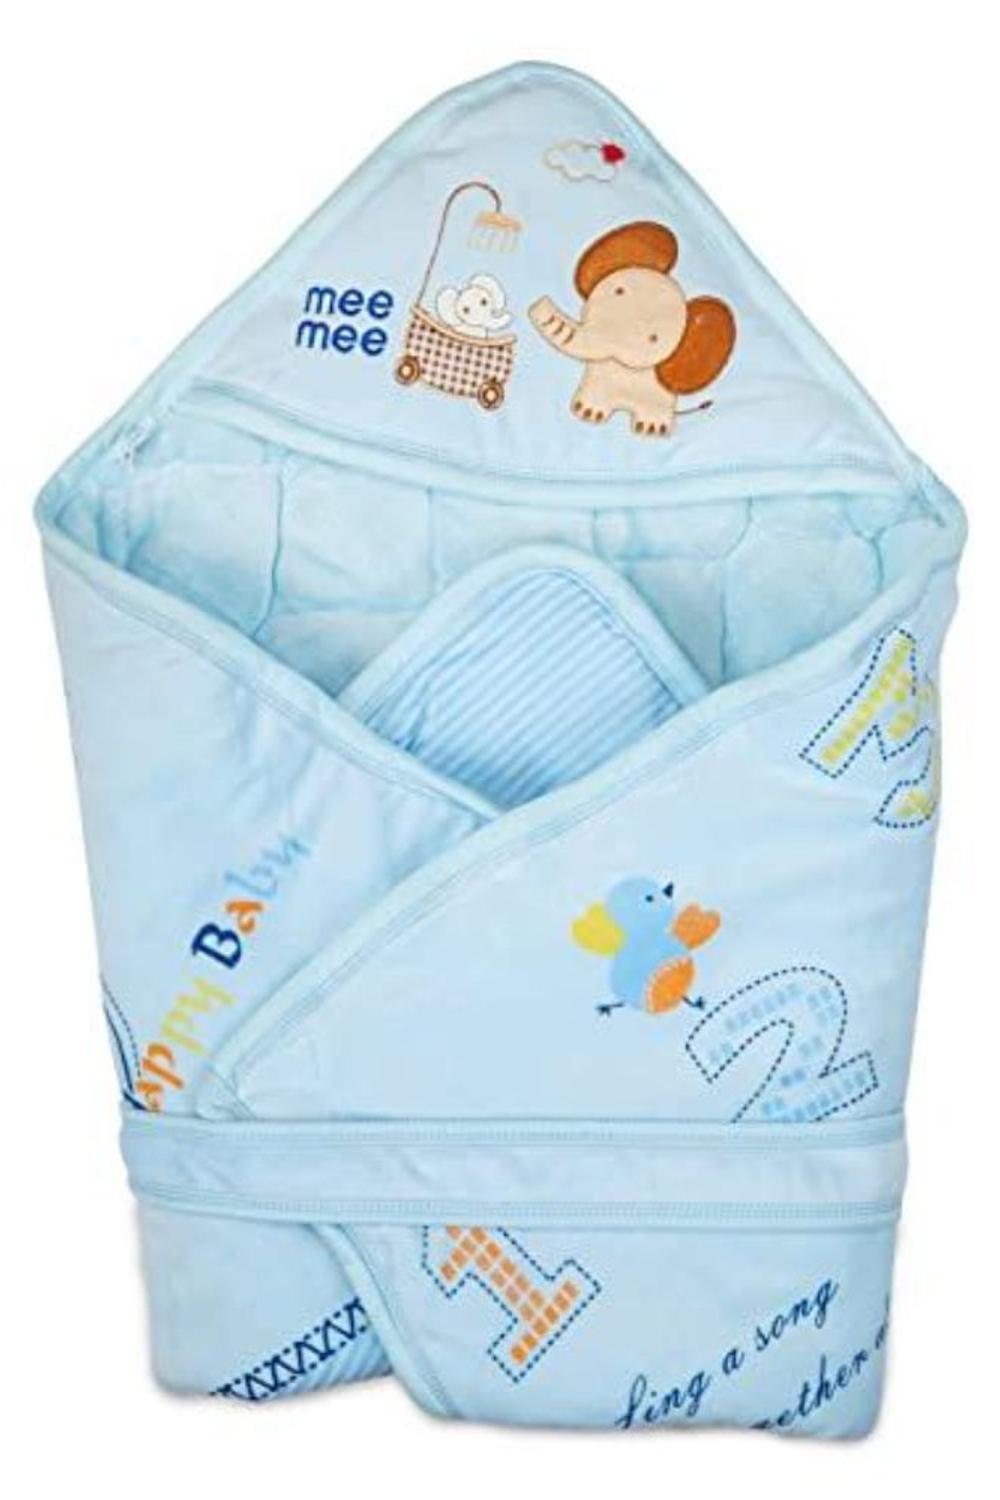 Mee Mee Baby Warm and Soft Swaddle Wrapper with Hood Blanket for Newborn Babies (Blue-Printed)